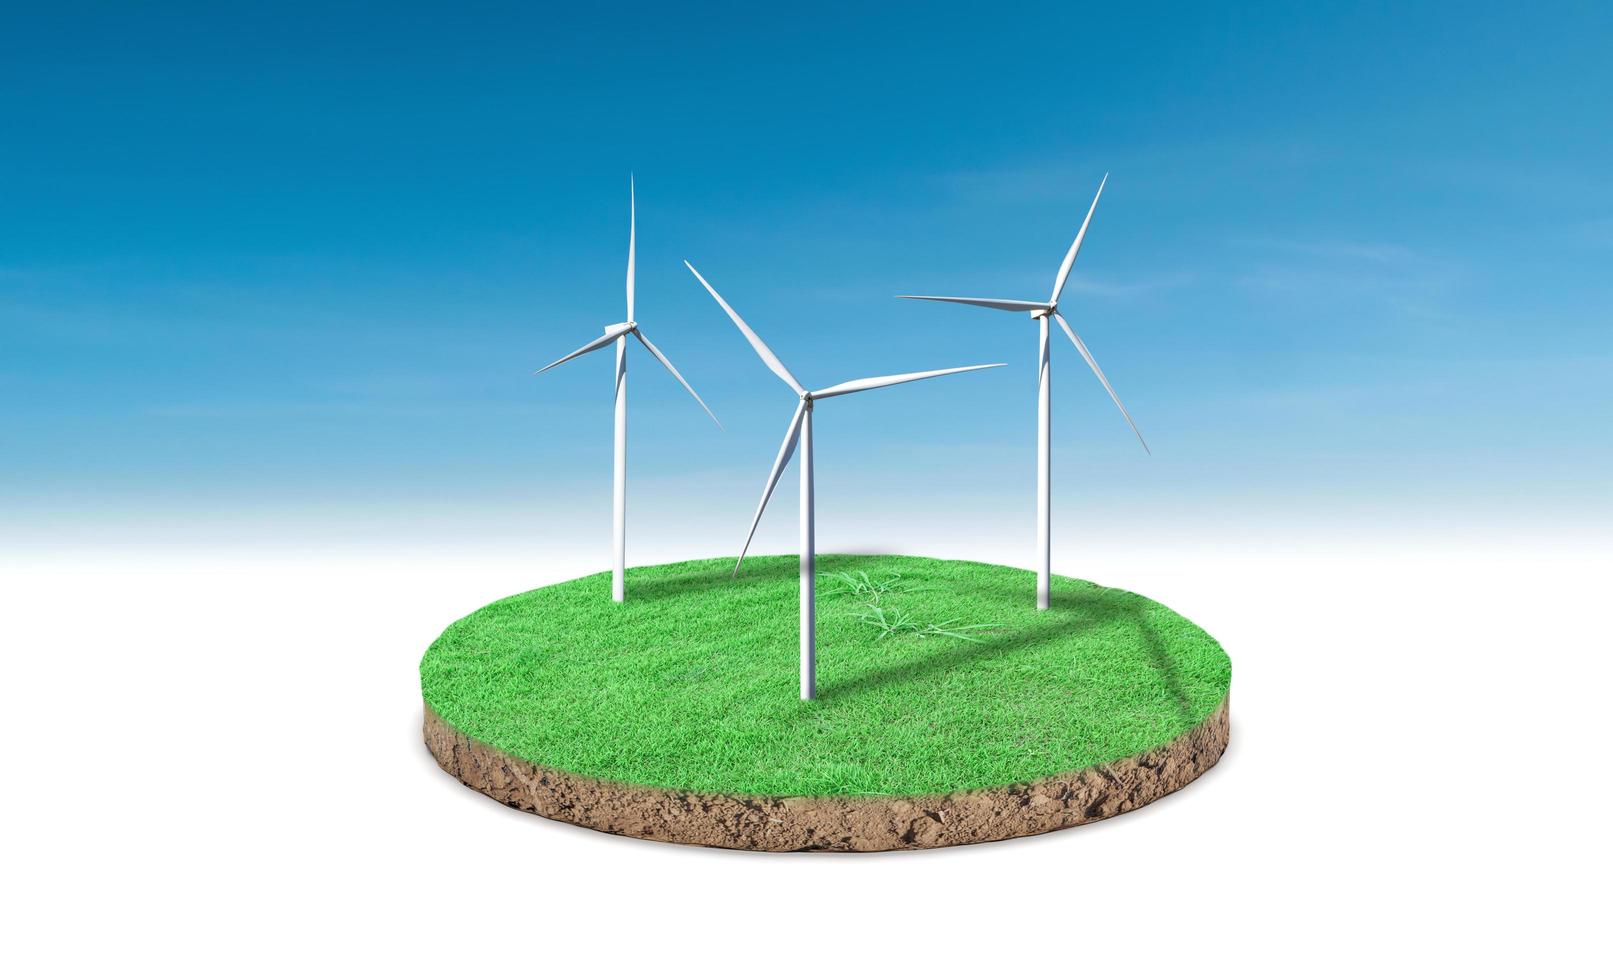 3d rendering. Cross section of green grass with wind turbine over blue sky background. photo